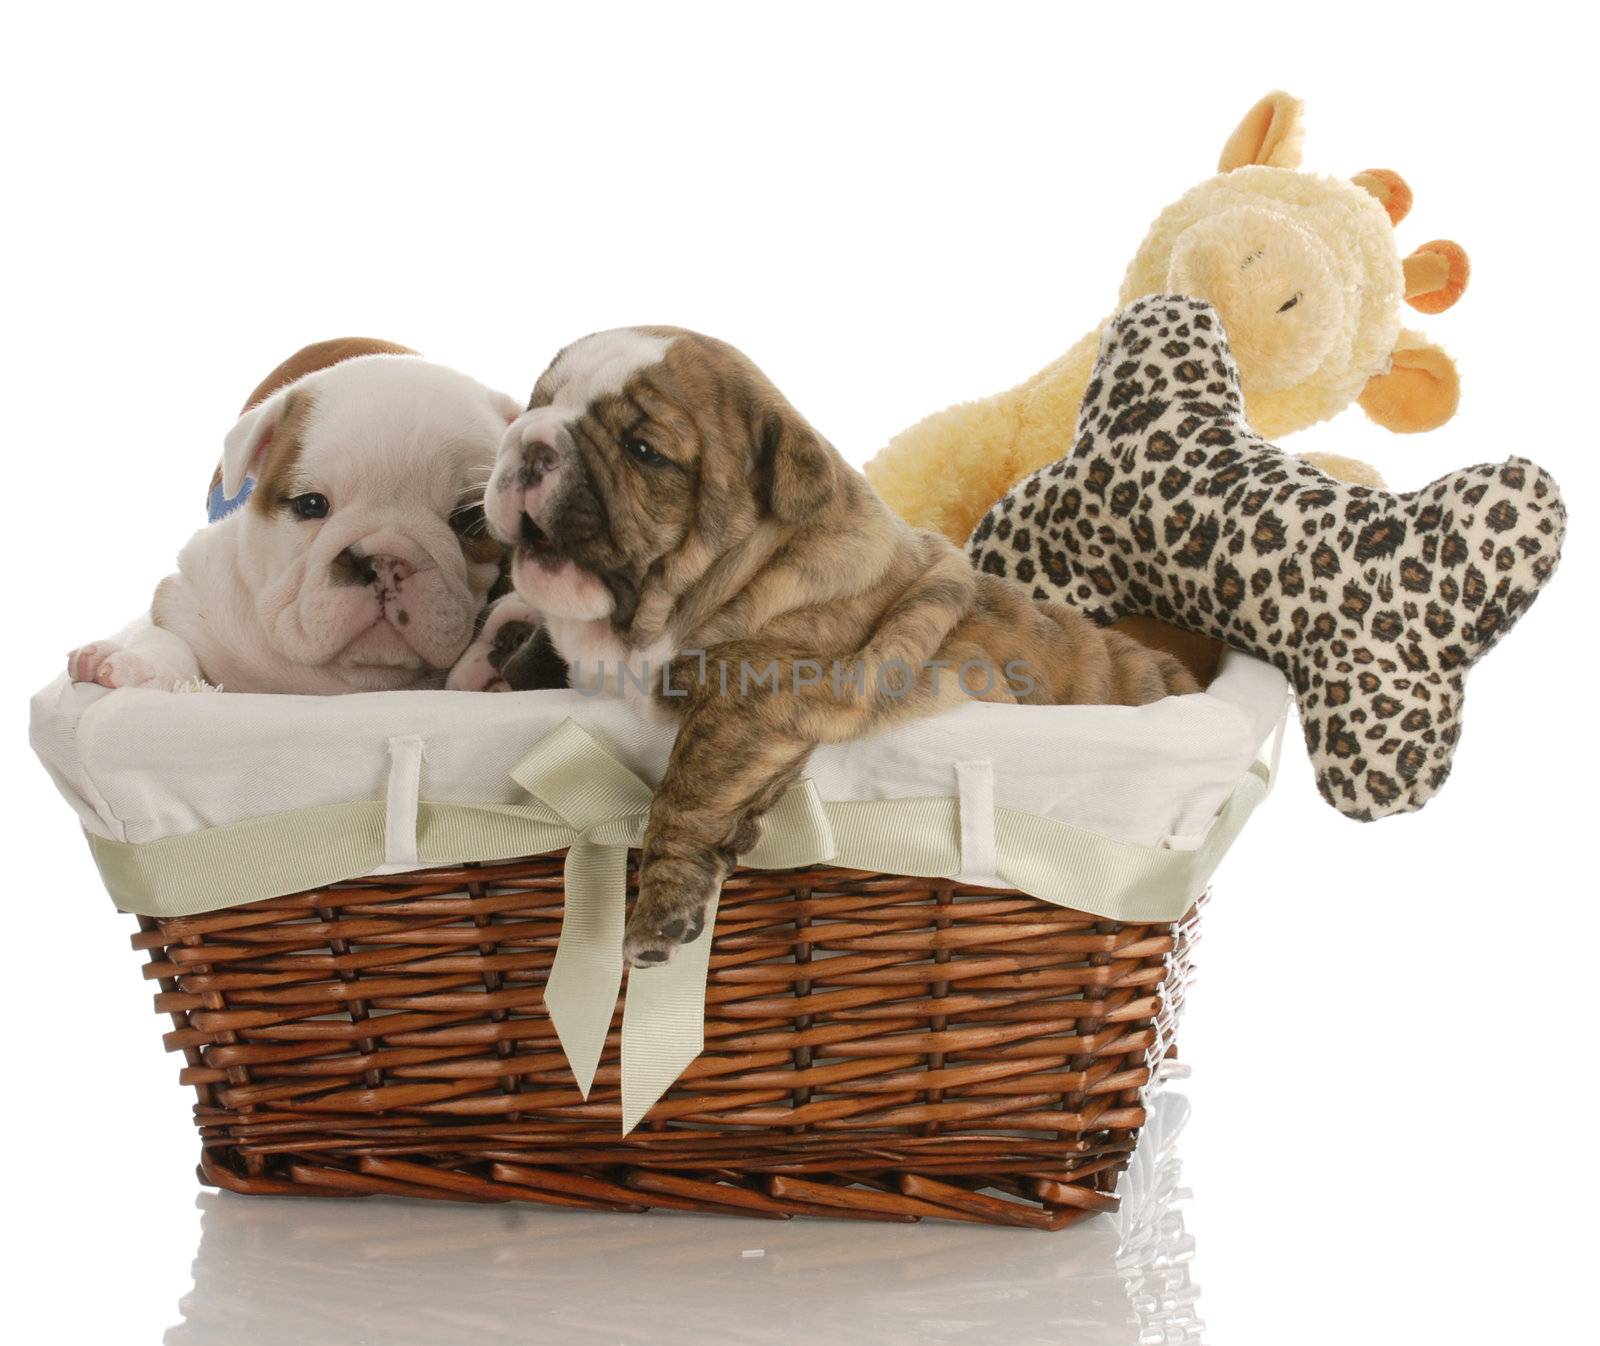 puppies in a basket by willeecole123